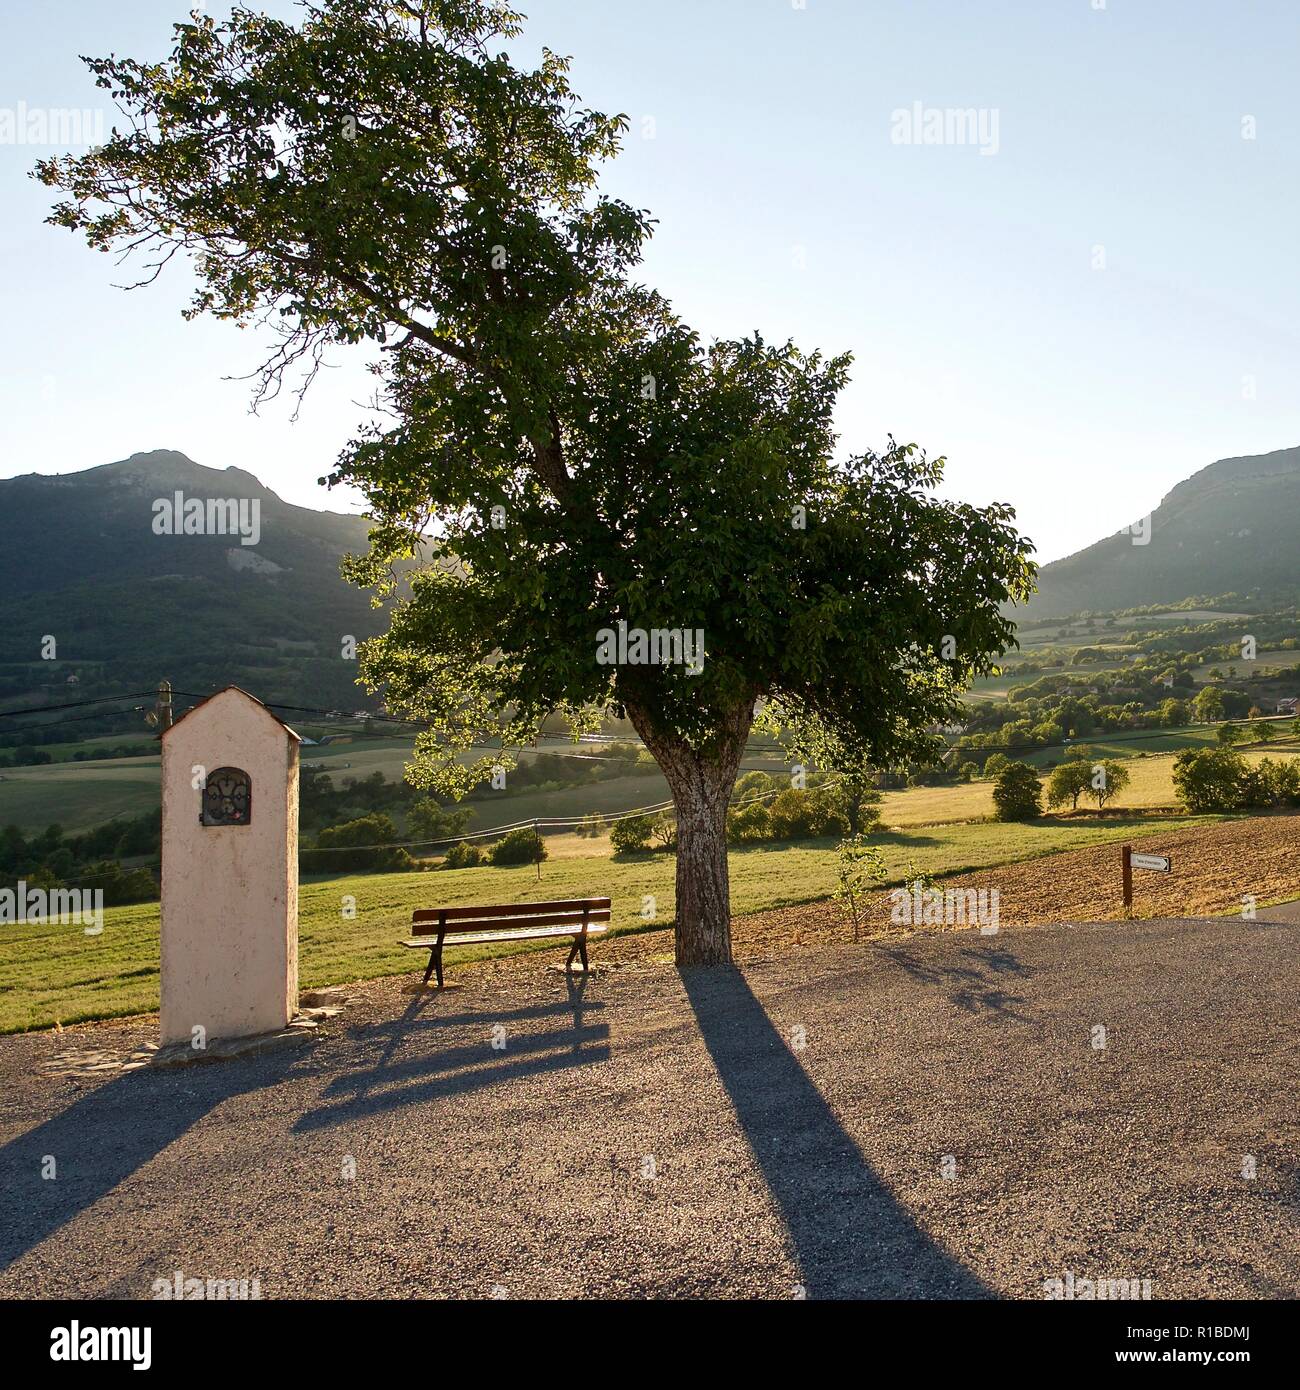 Rural idyll in the French Alps in summer, with tree and bench Stock Photo